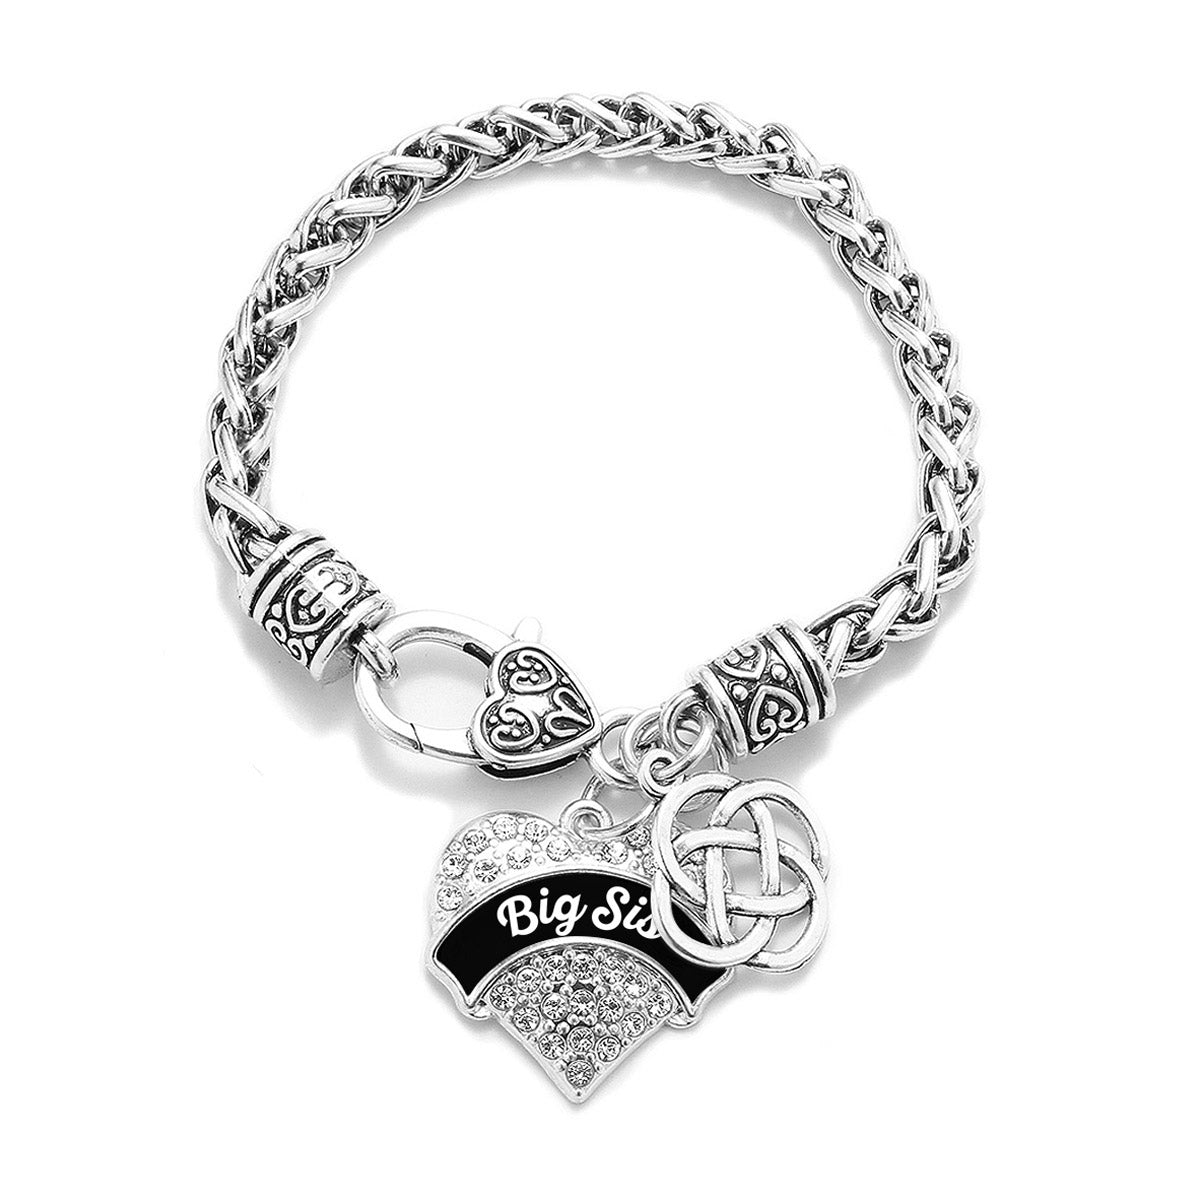 Silver Black and White Big Sis Celtic Knot Pave Heart Charm Braided Bracelet